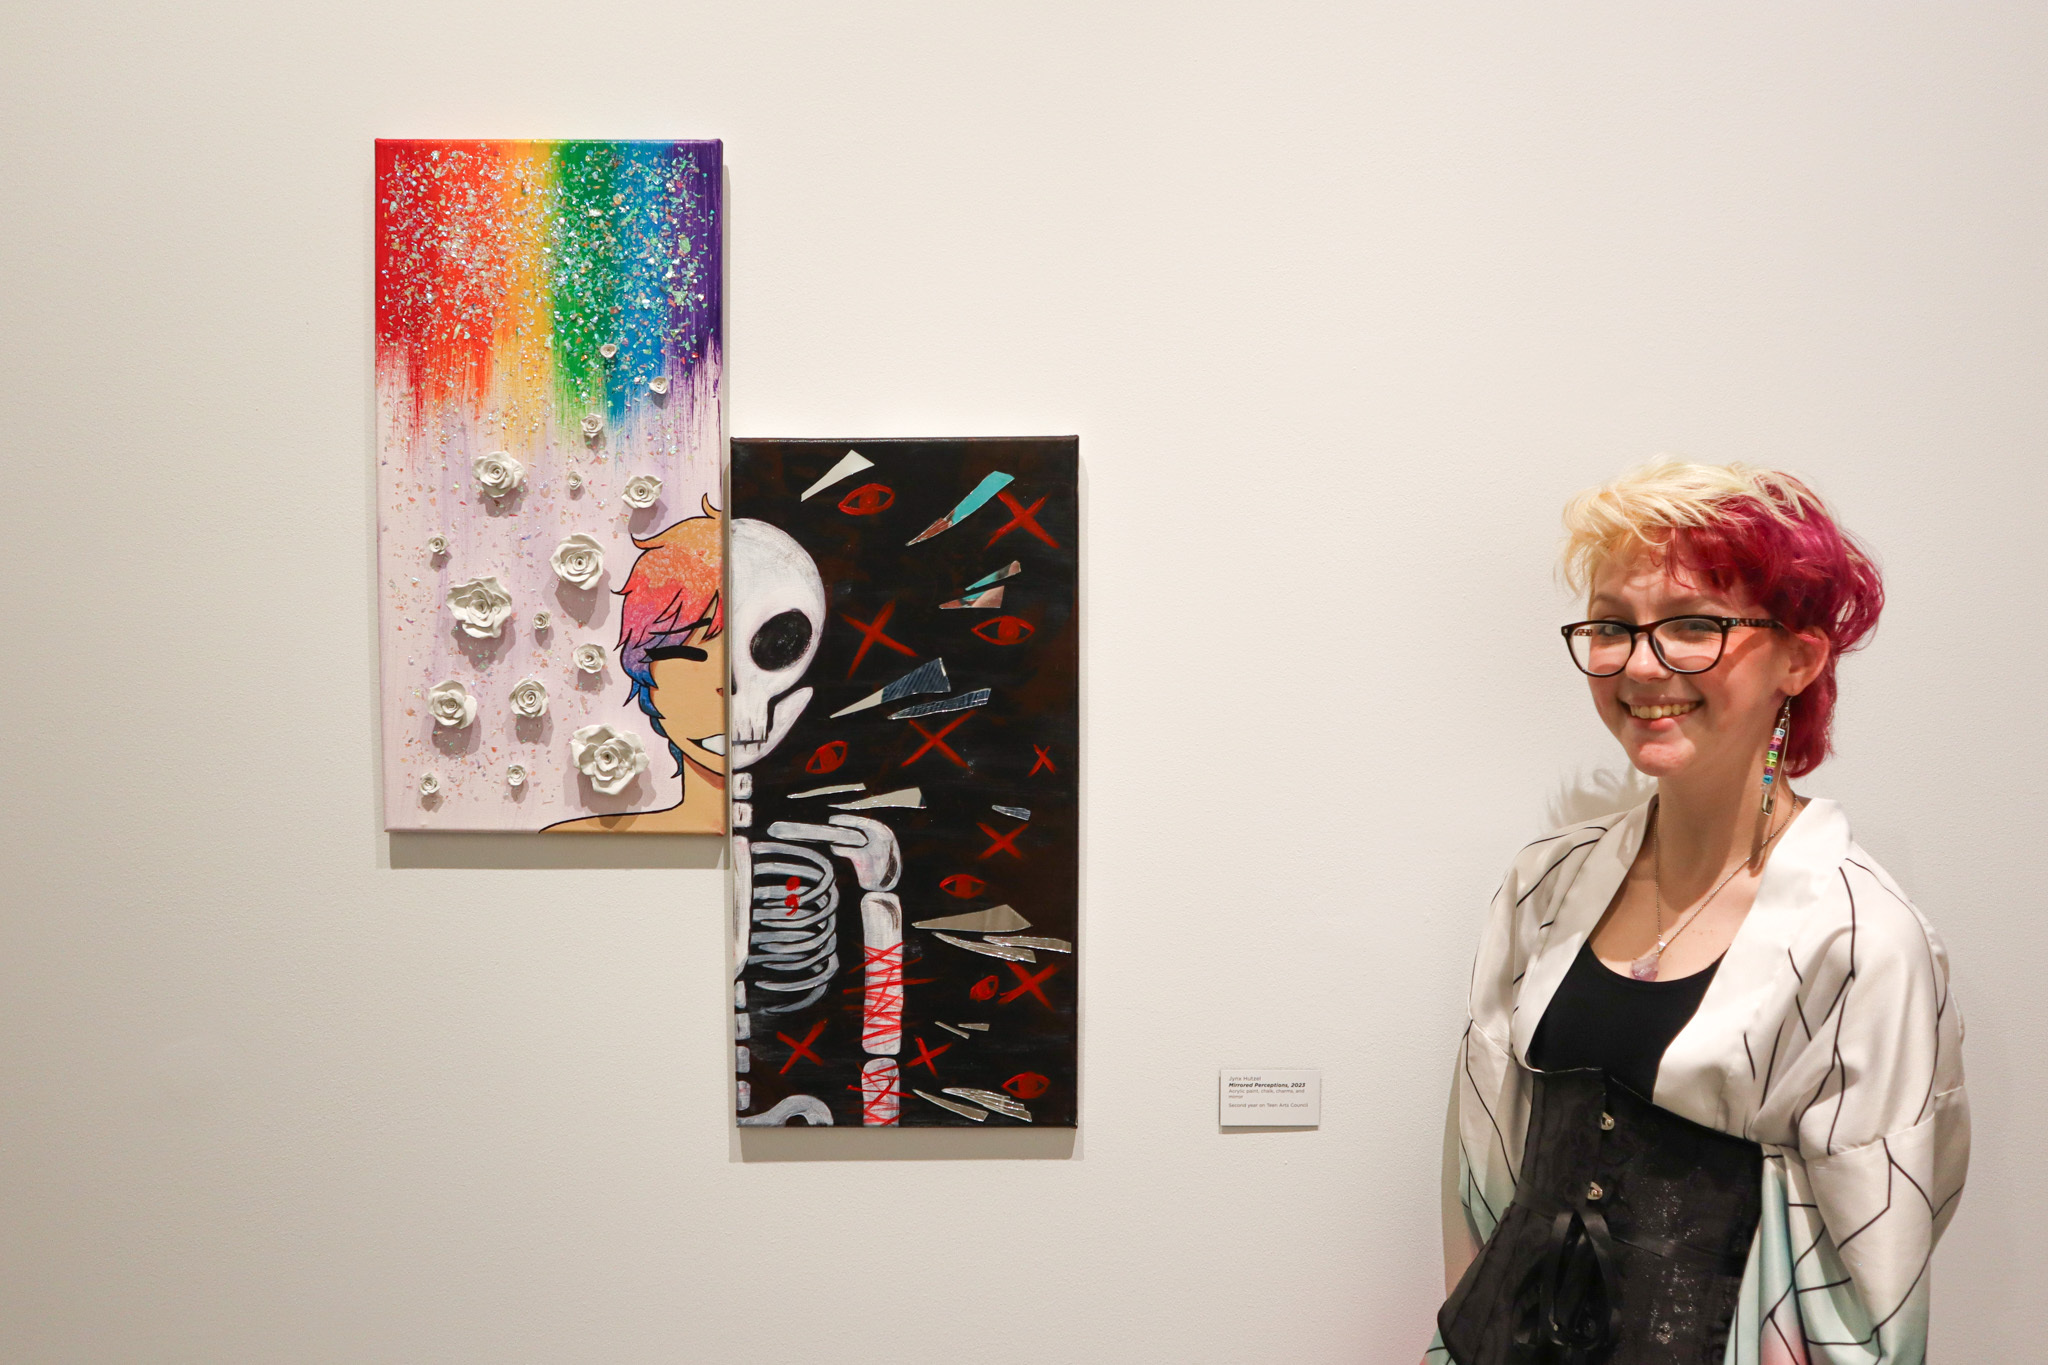 A young person with platinum and bright pink short hair smiles in front of two canvases portraying a rainbow and dark/skeleton side of the same face.